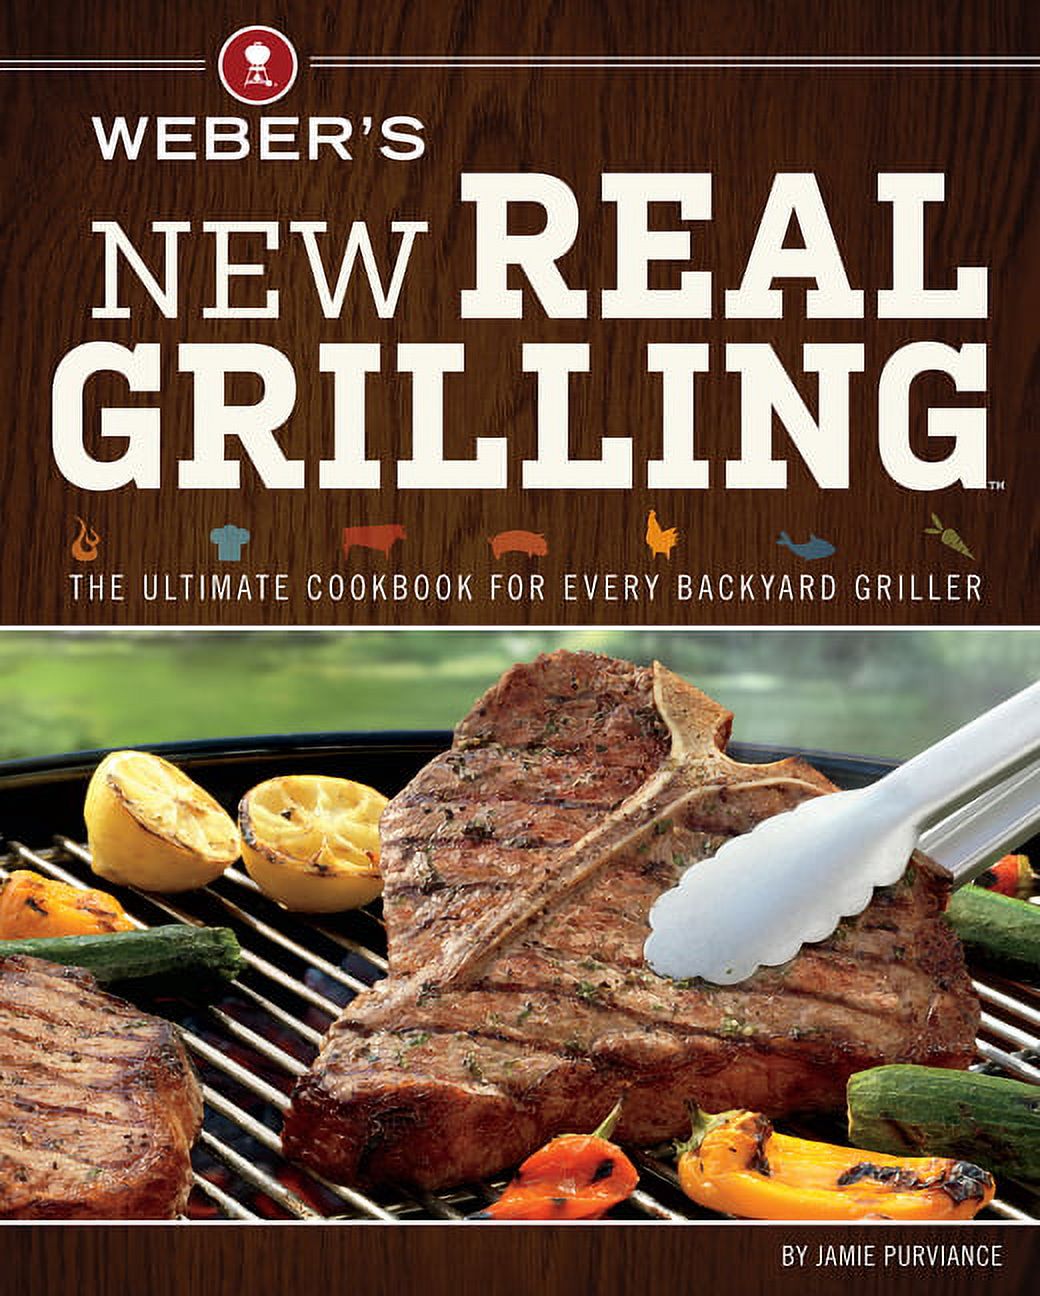 Weber's New Real Grilling (Paperback) - image 1 of 2